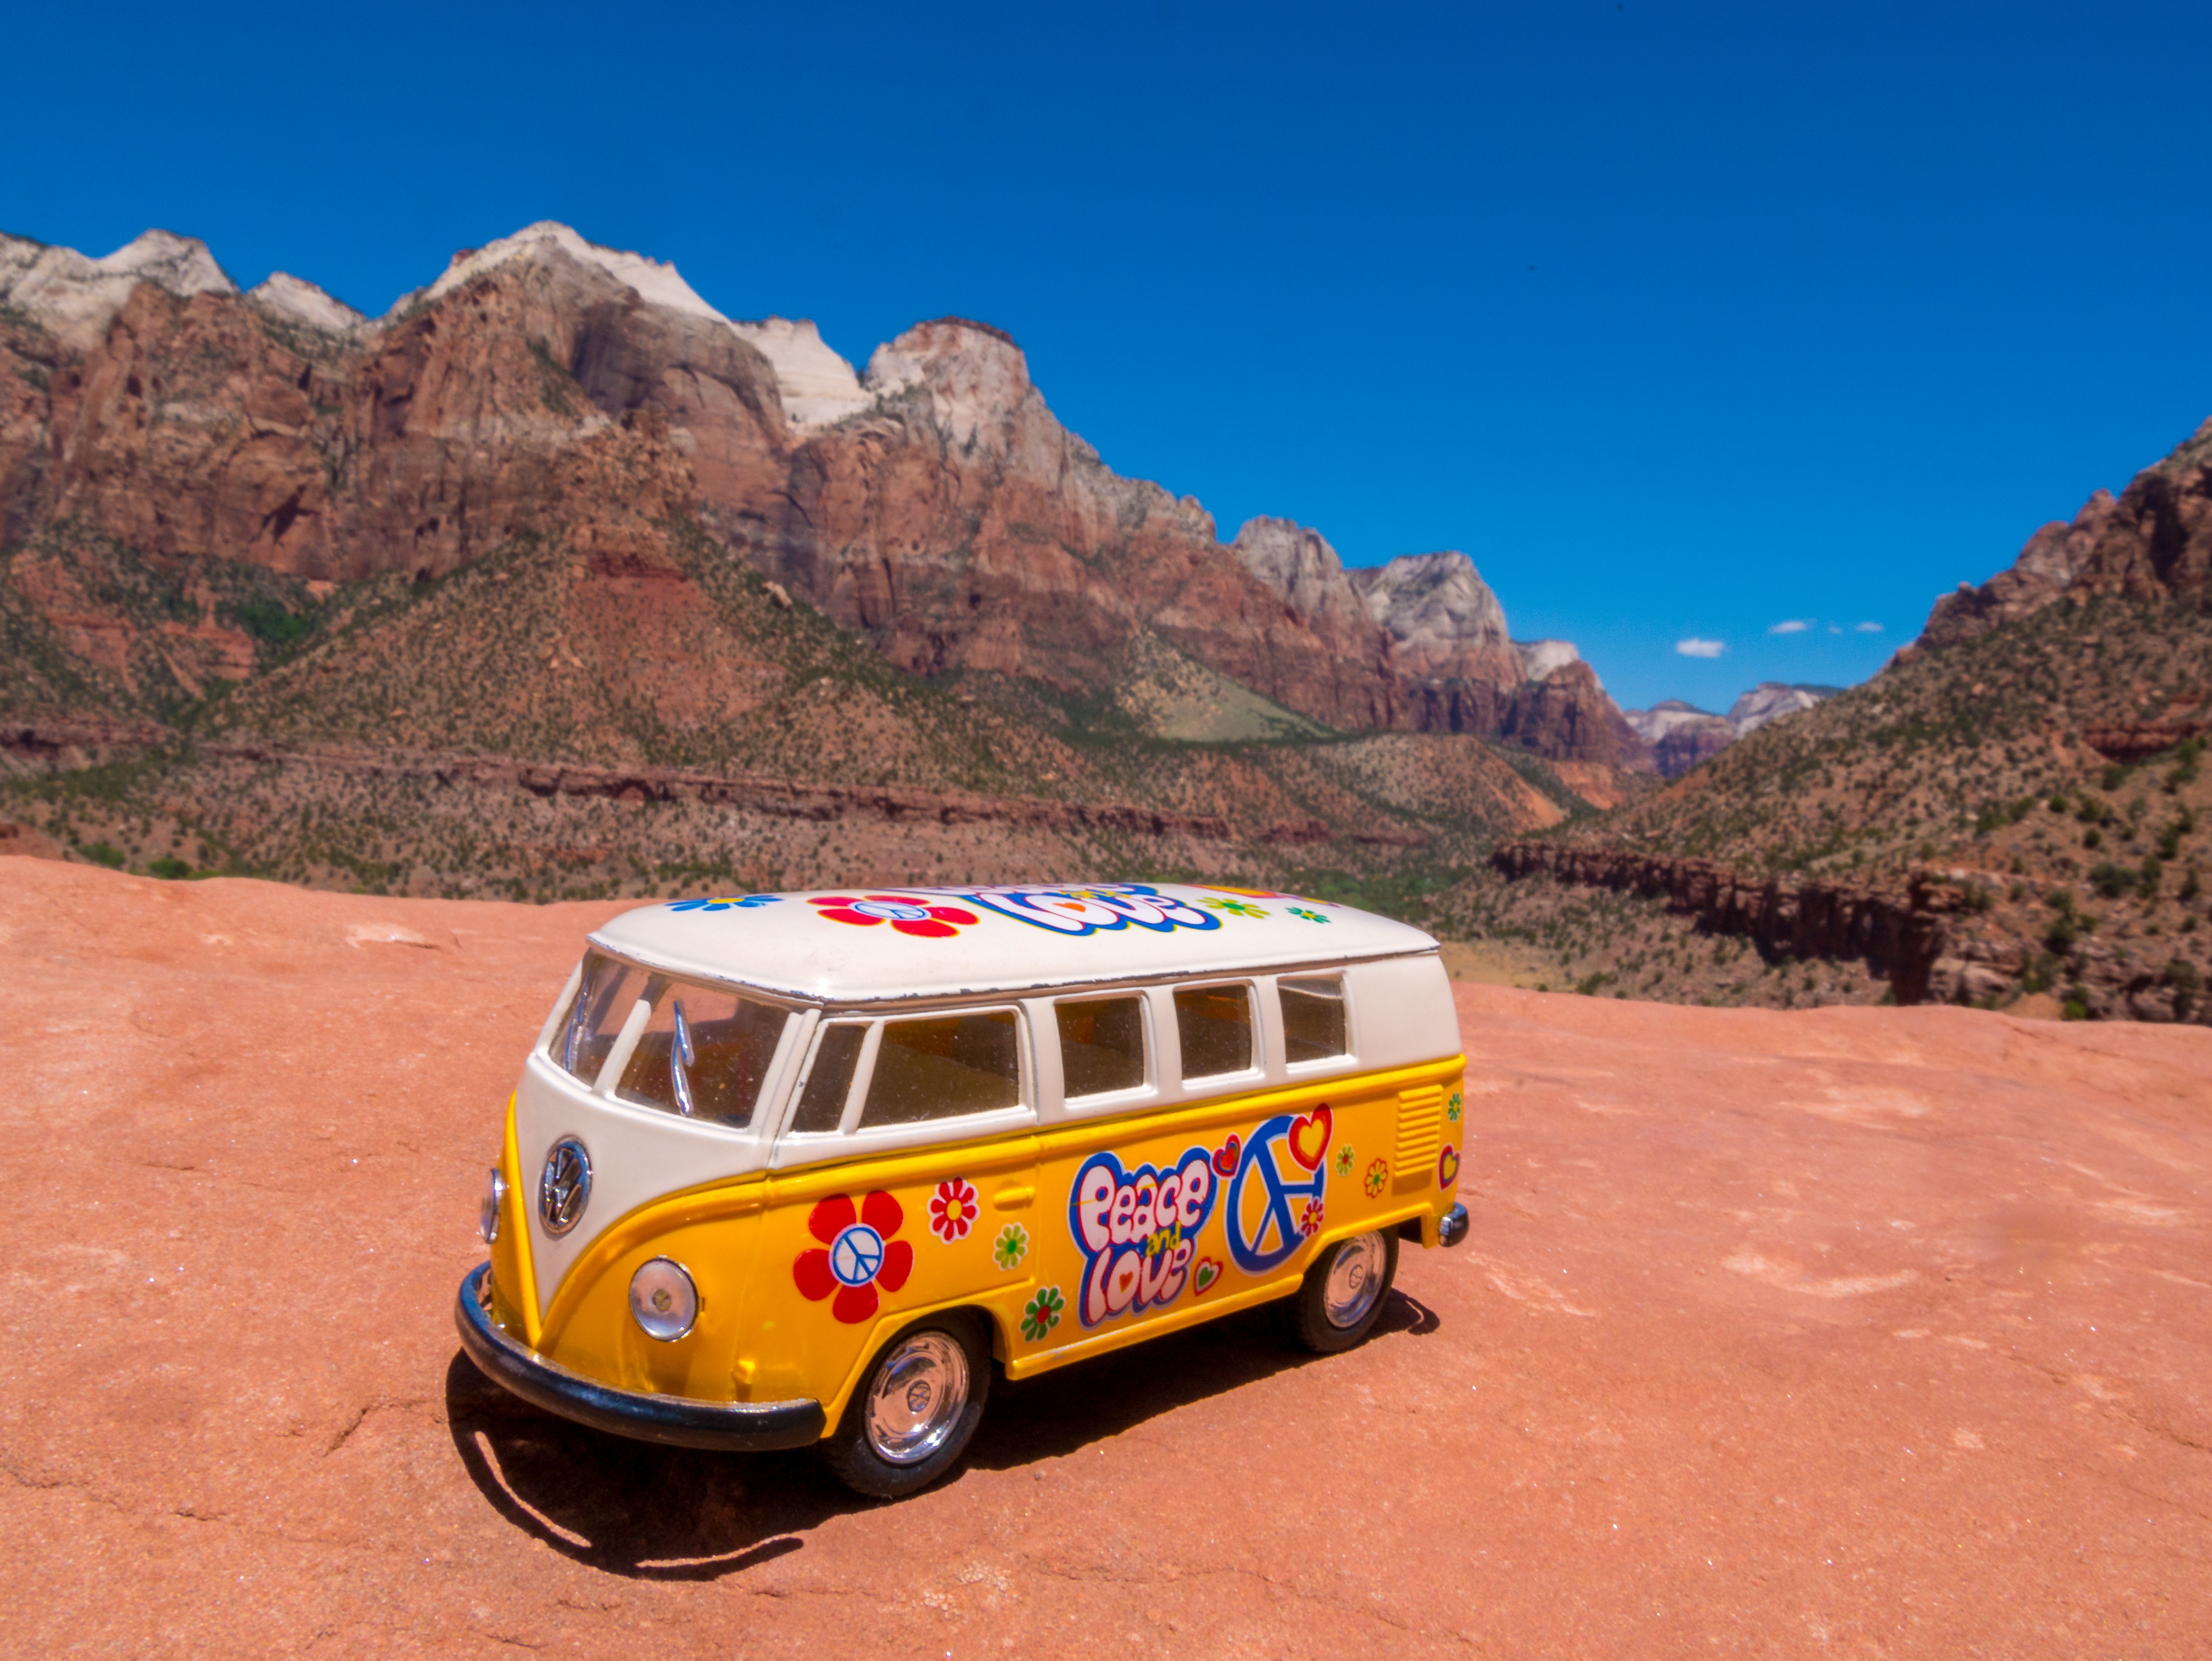 The yellow van at the end of the Watchman Trail at Zion National Park